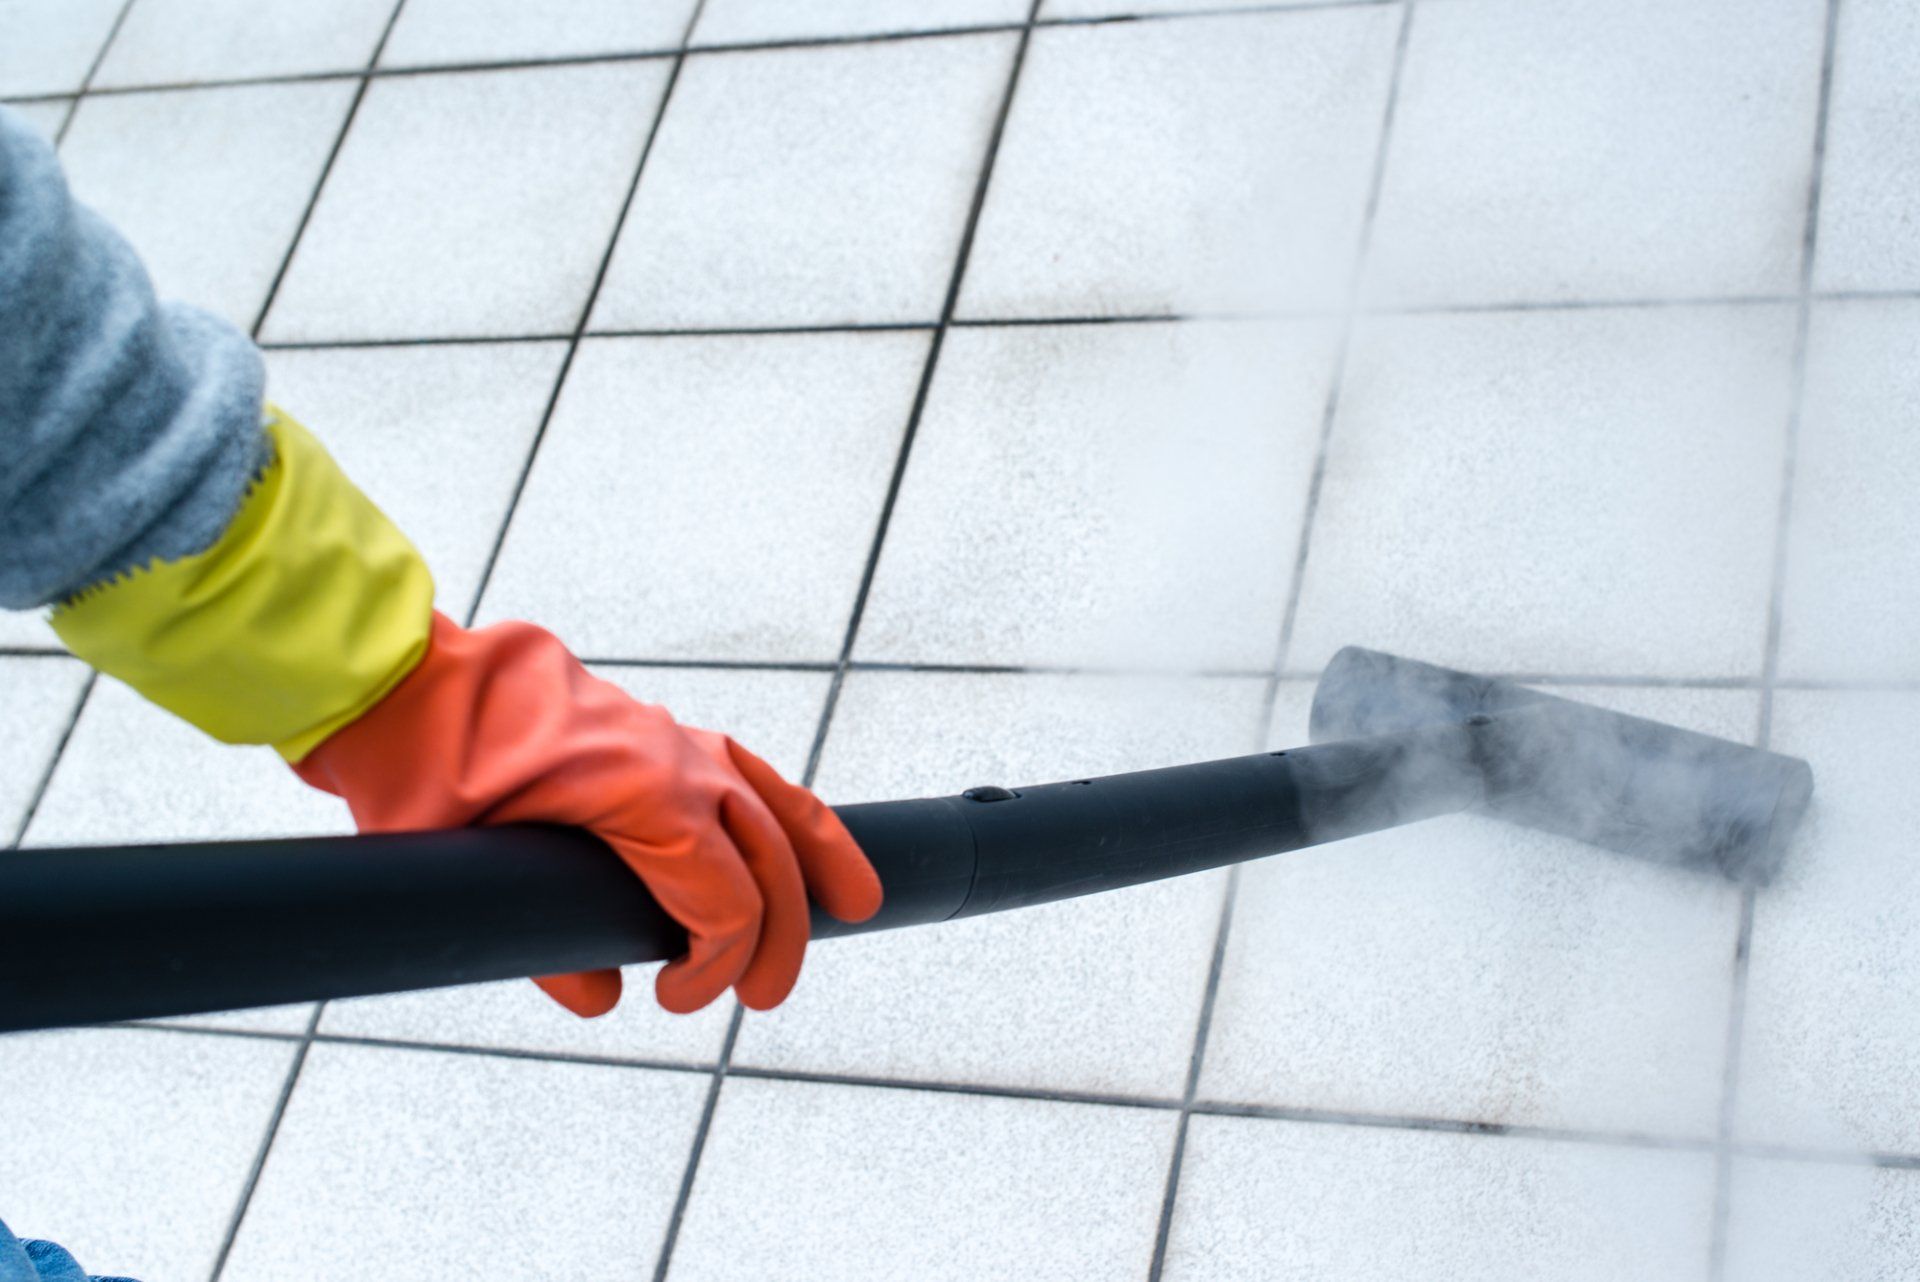 Tile Cleaning Services in Atlanta, GA | DJK Cleaning Service LLC